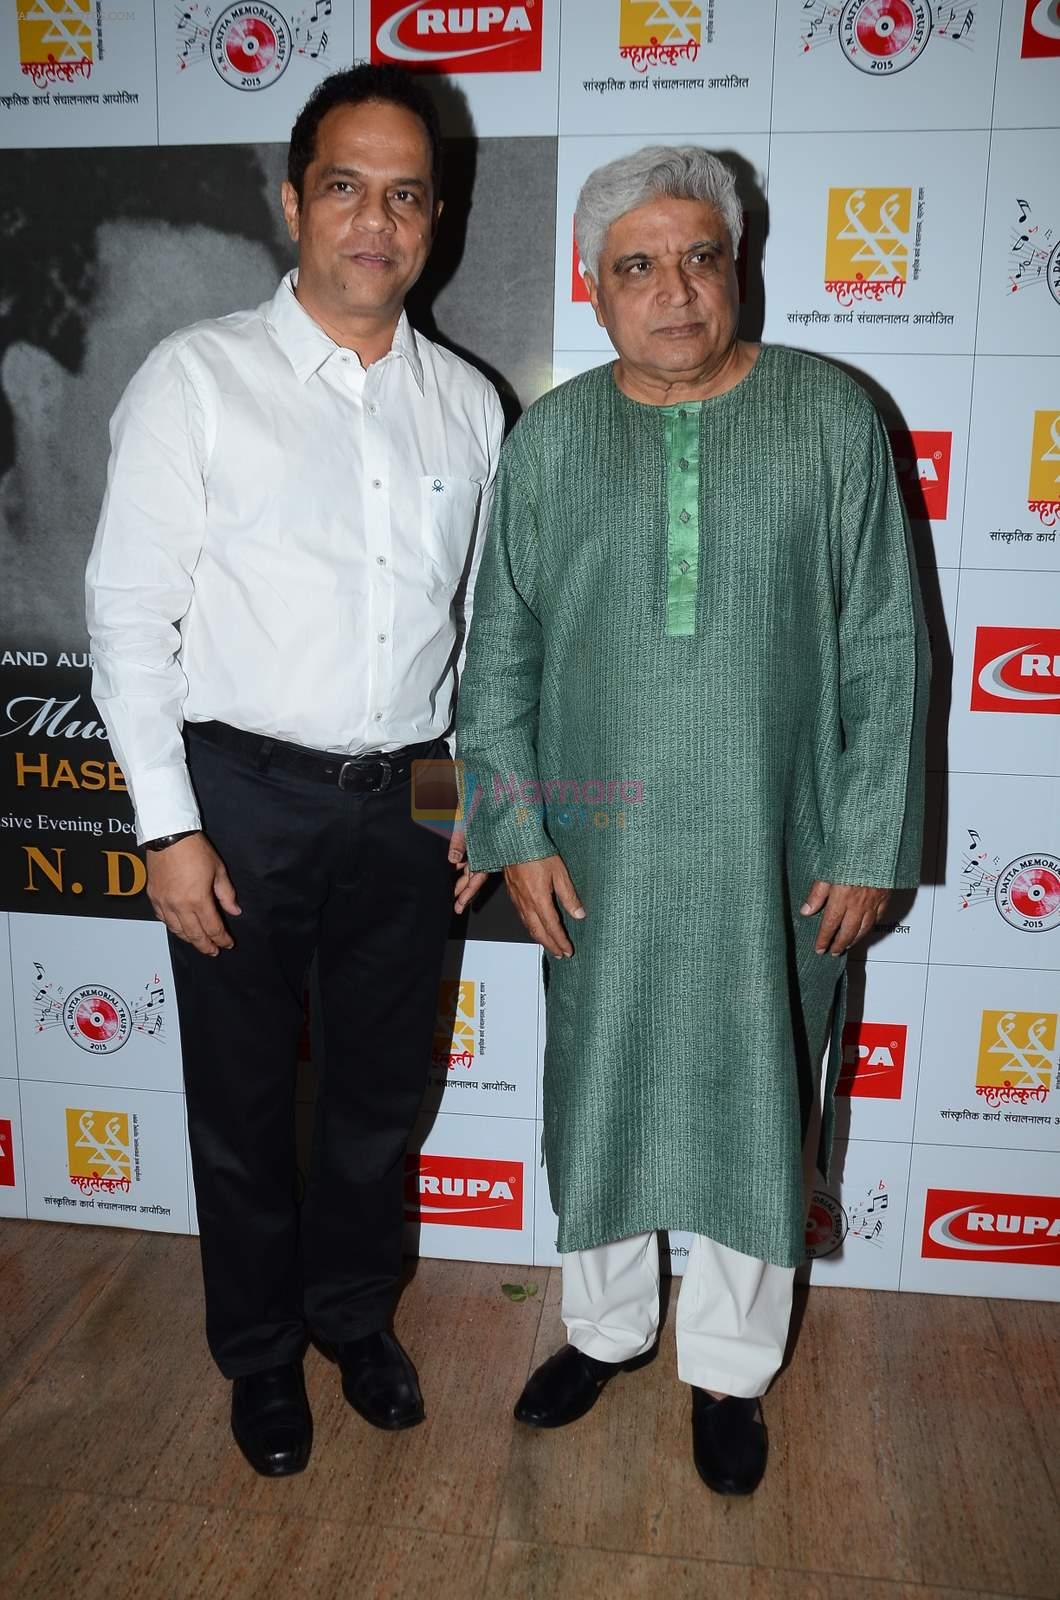 Javed Akhtar at the Musical evening dedicated to legendary Music Director N Datta in Ravindra Natya Mandir on 4th June 2015